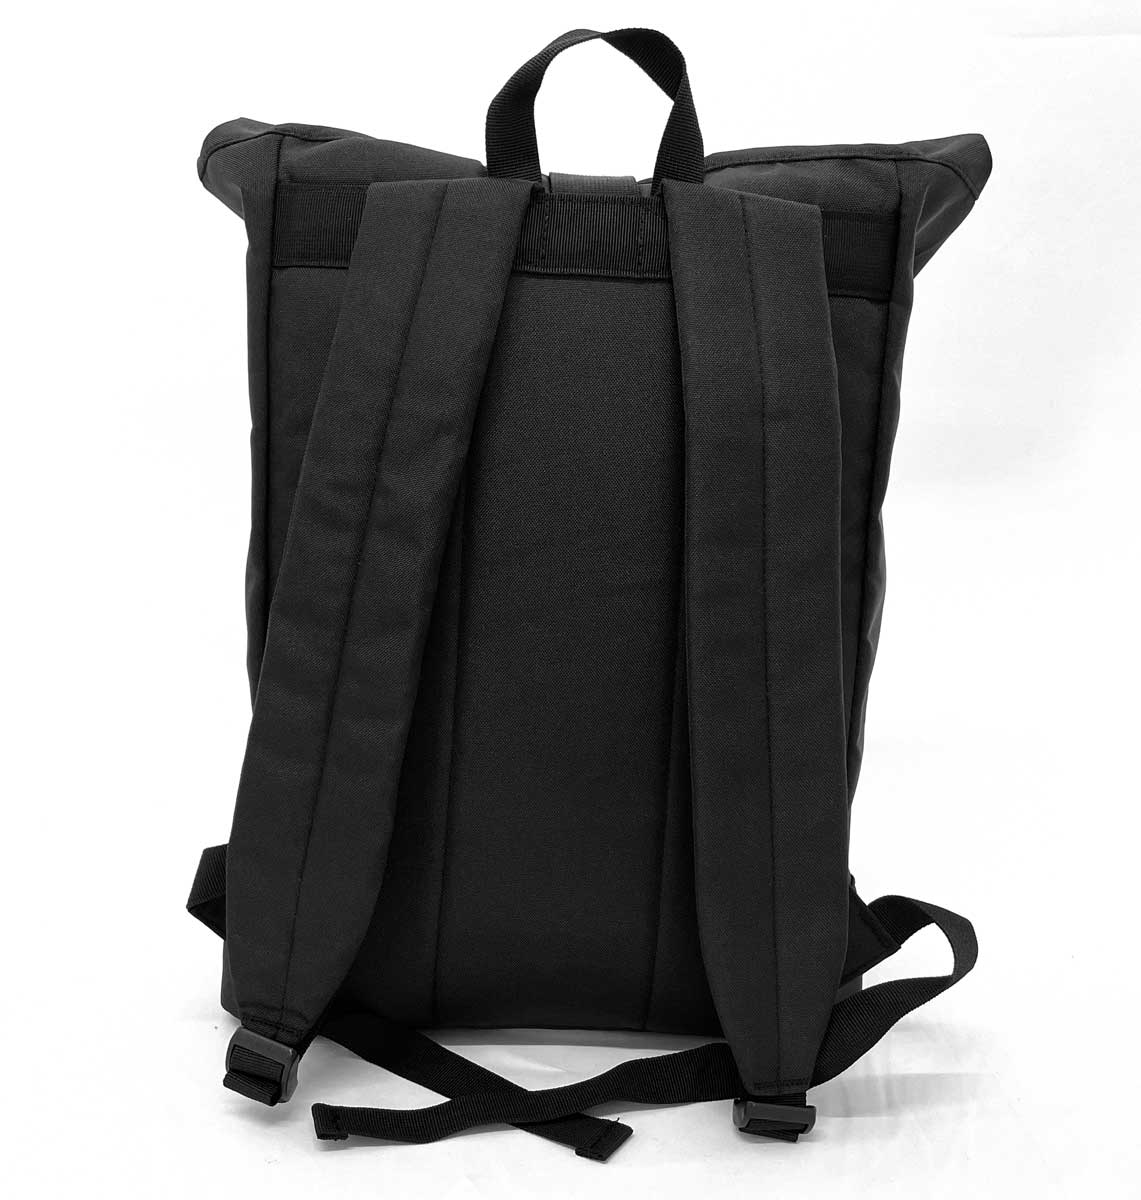 Turtle Beach Roll-top Recycled Backpack - Blue Panda